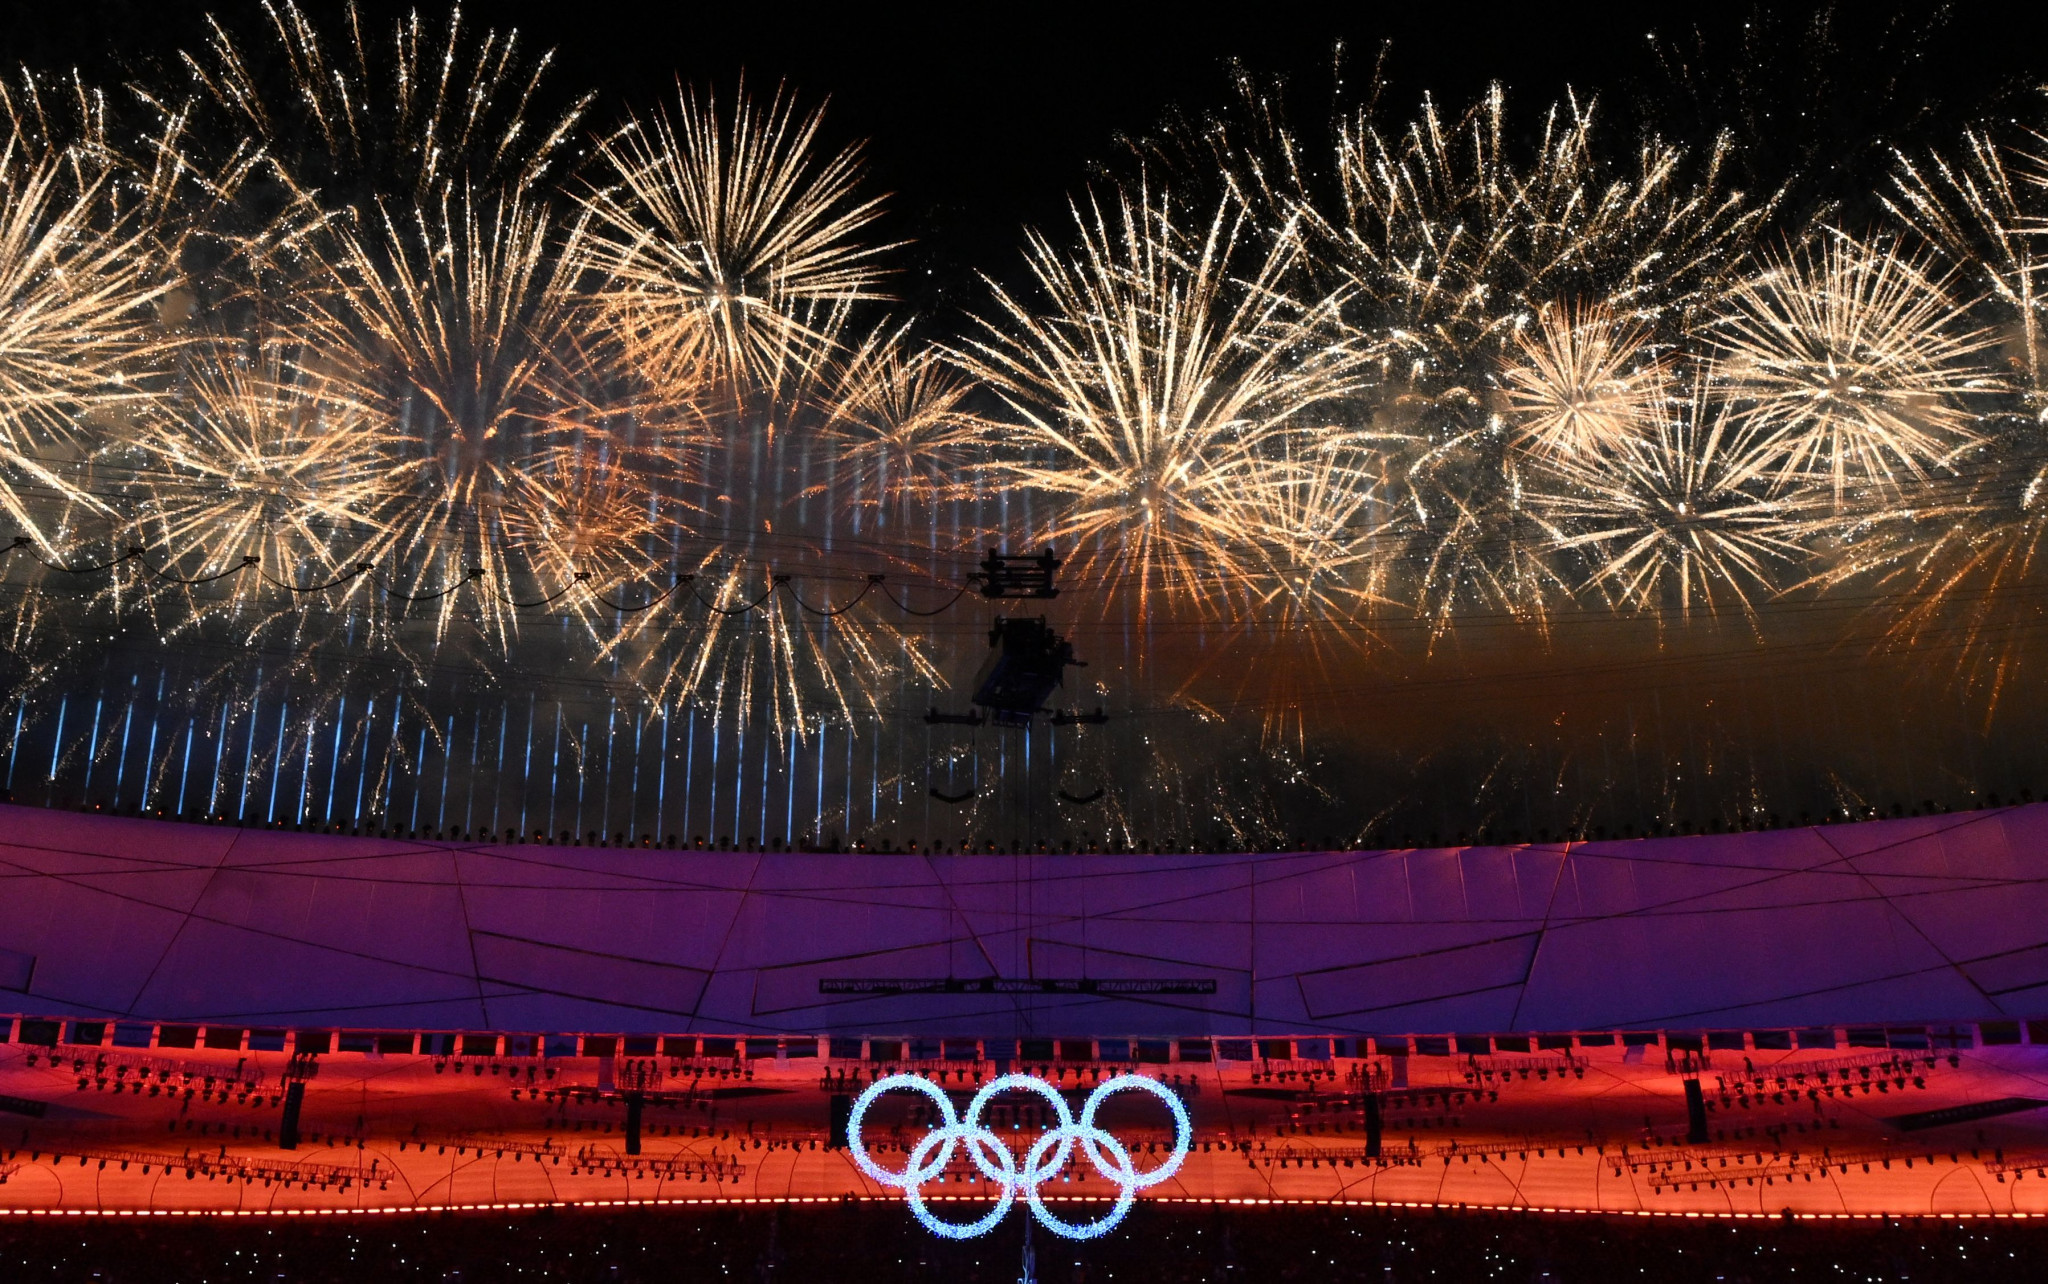 Fireworks were set off at the Bird's Nest to mark the end of the Games ©Getty Images